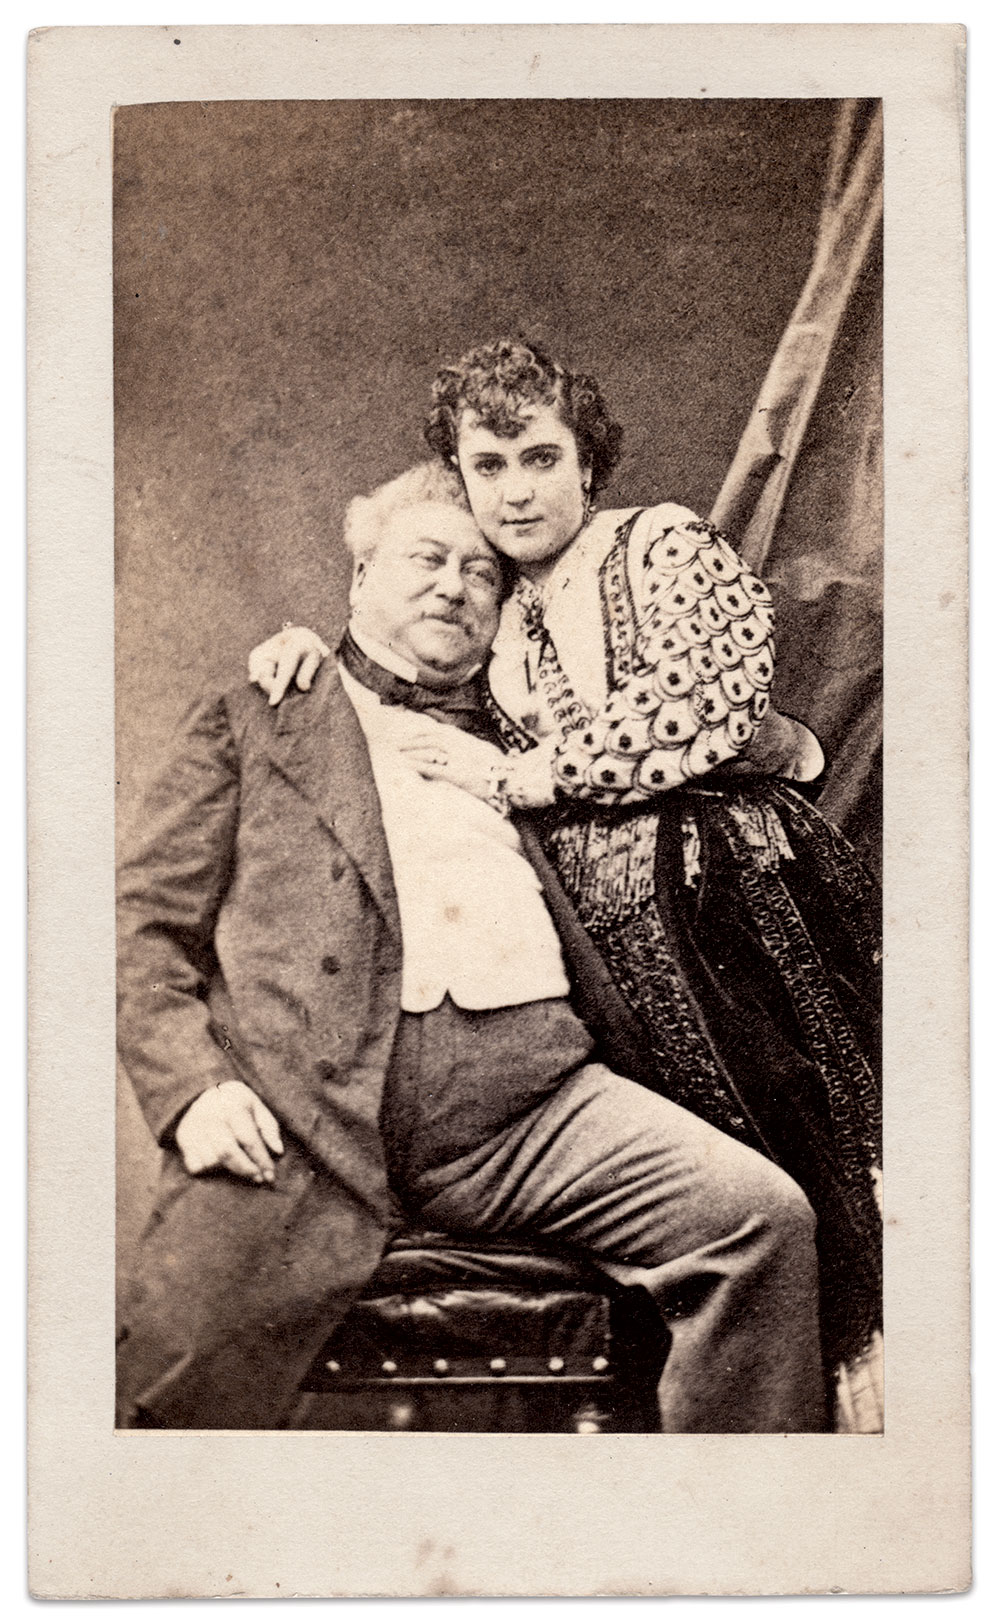 She enjoyed the company of Alexandre Dumas and other Bohemians in Paris and New York City. Carte de visite by an unidentified photographer.